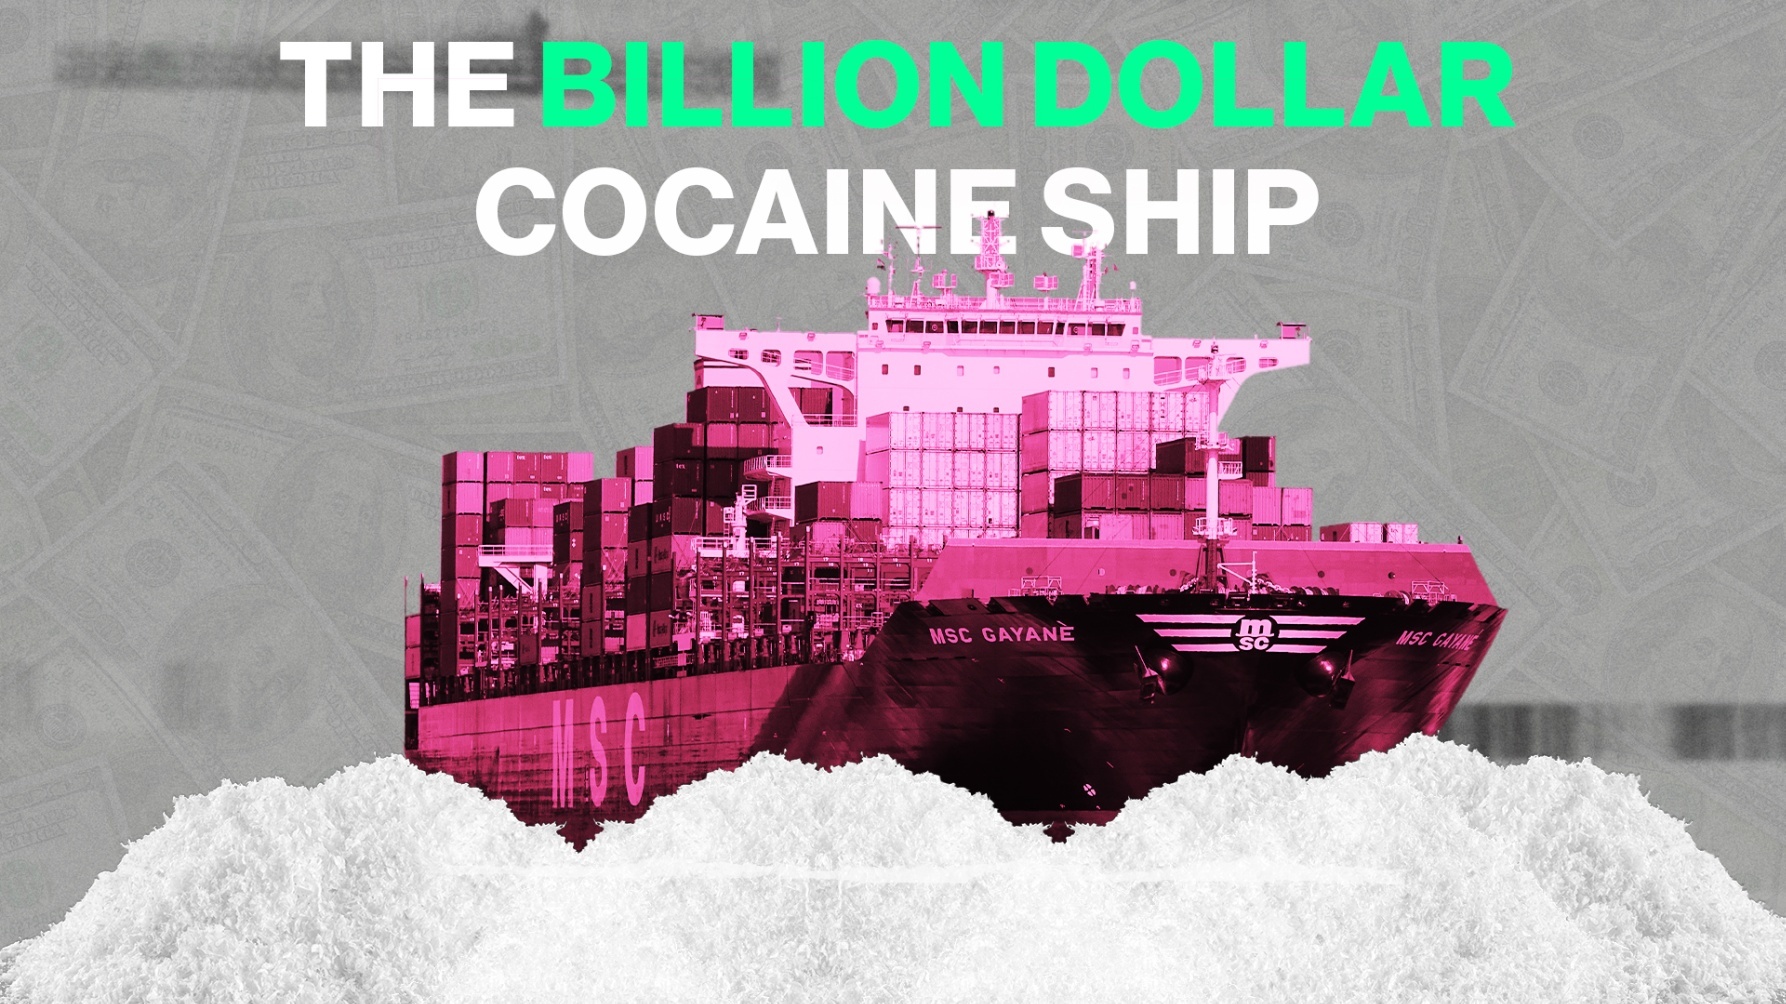 How World's Top Shipping Company Became Hub for Drug Trafficking